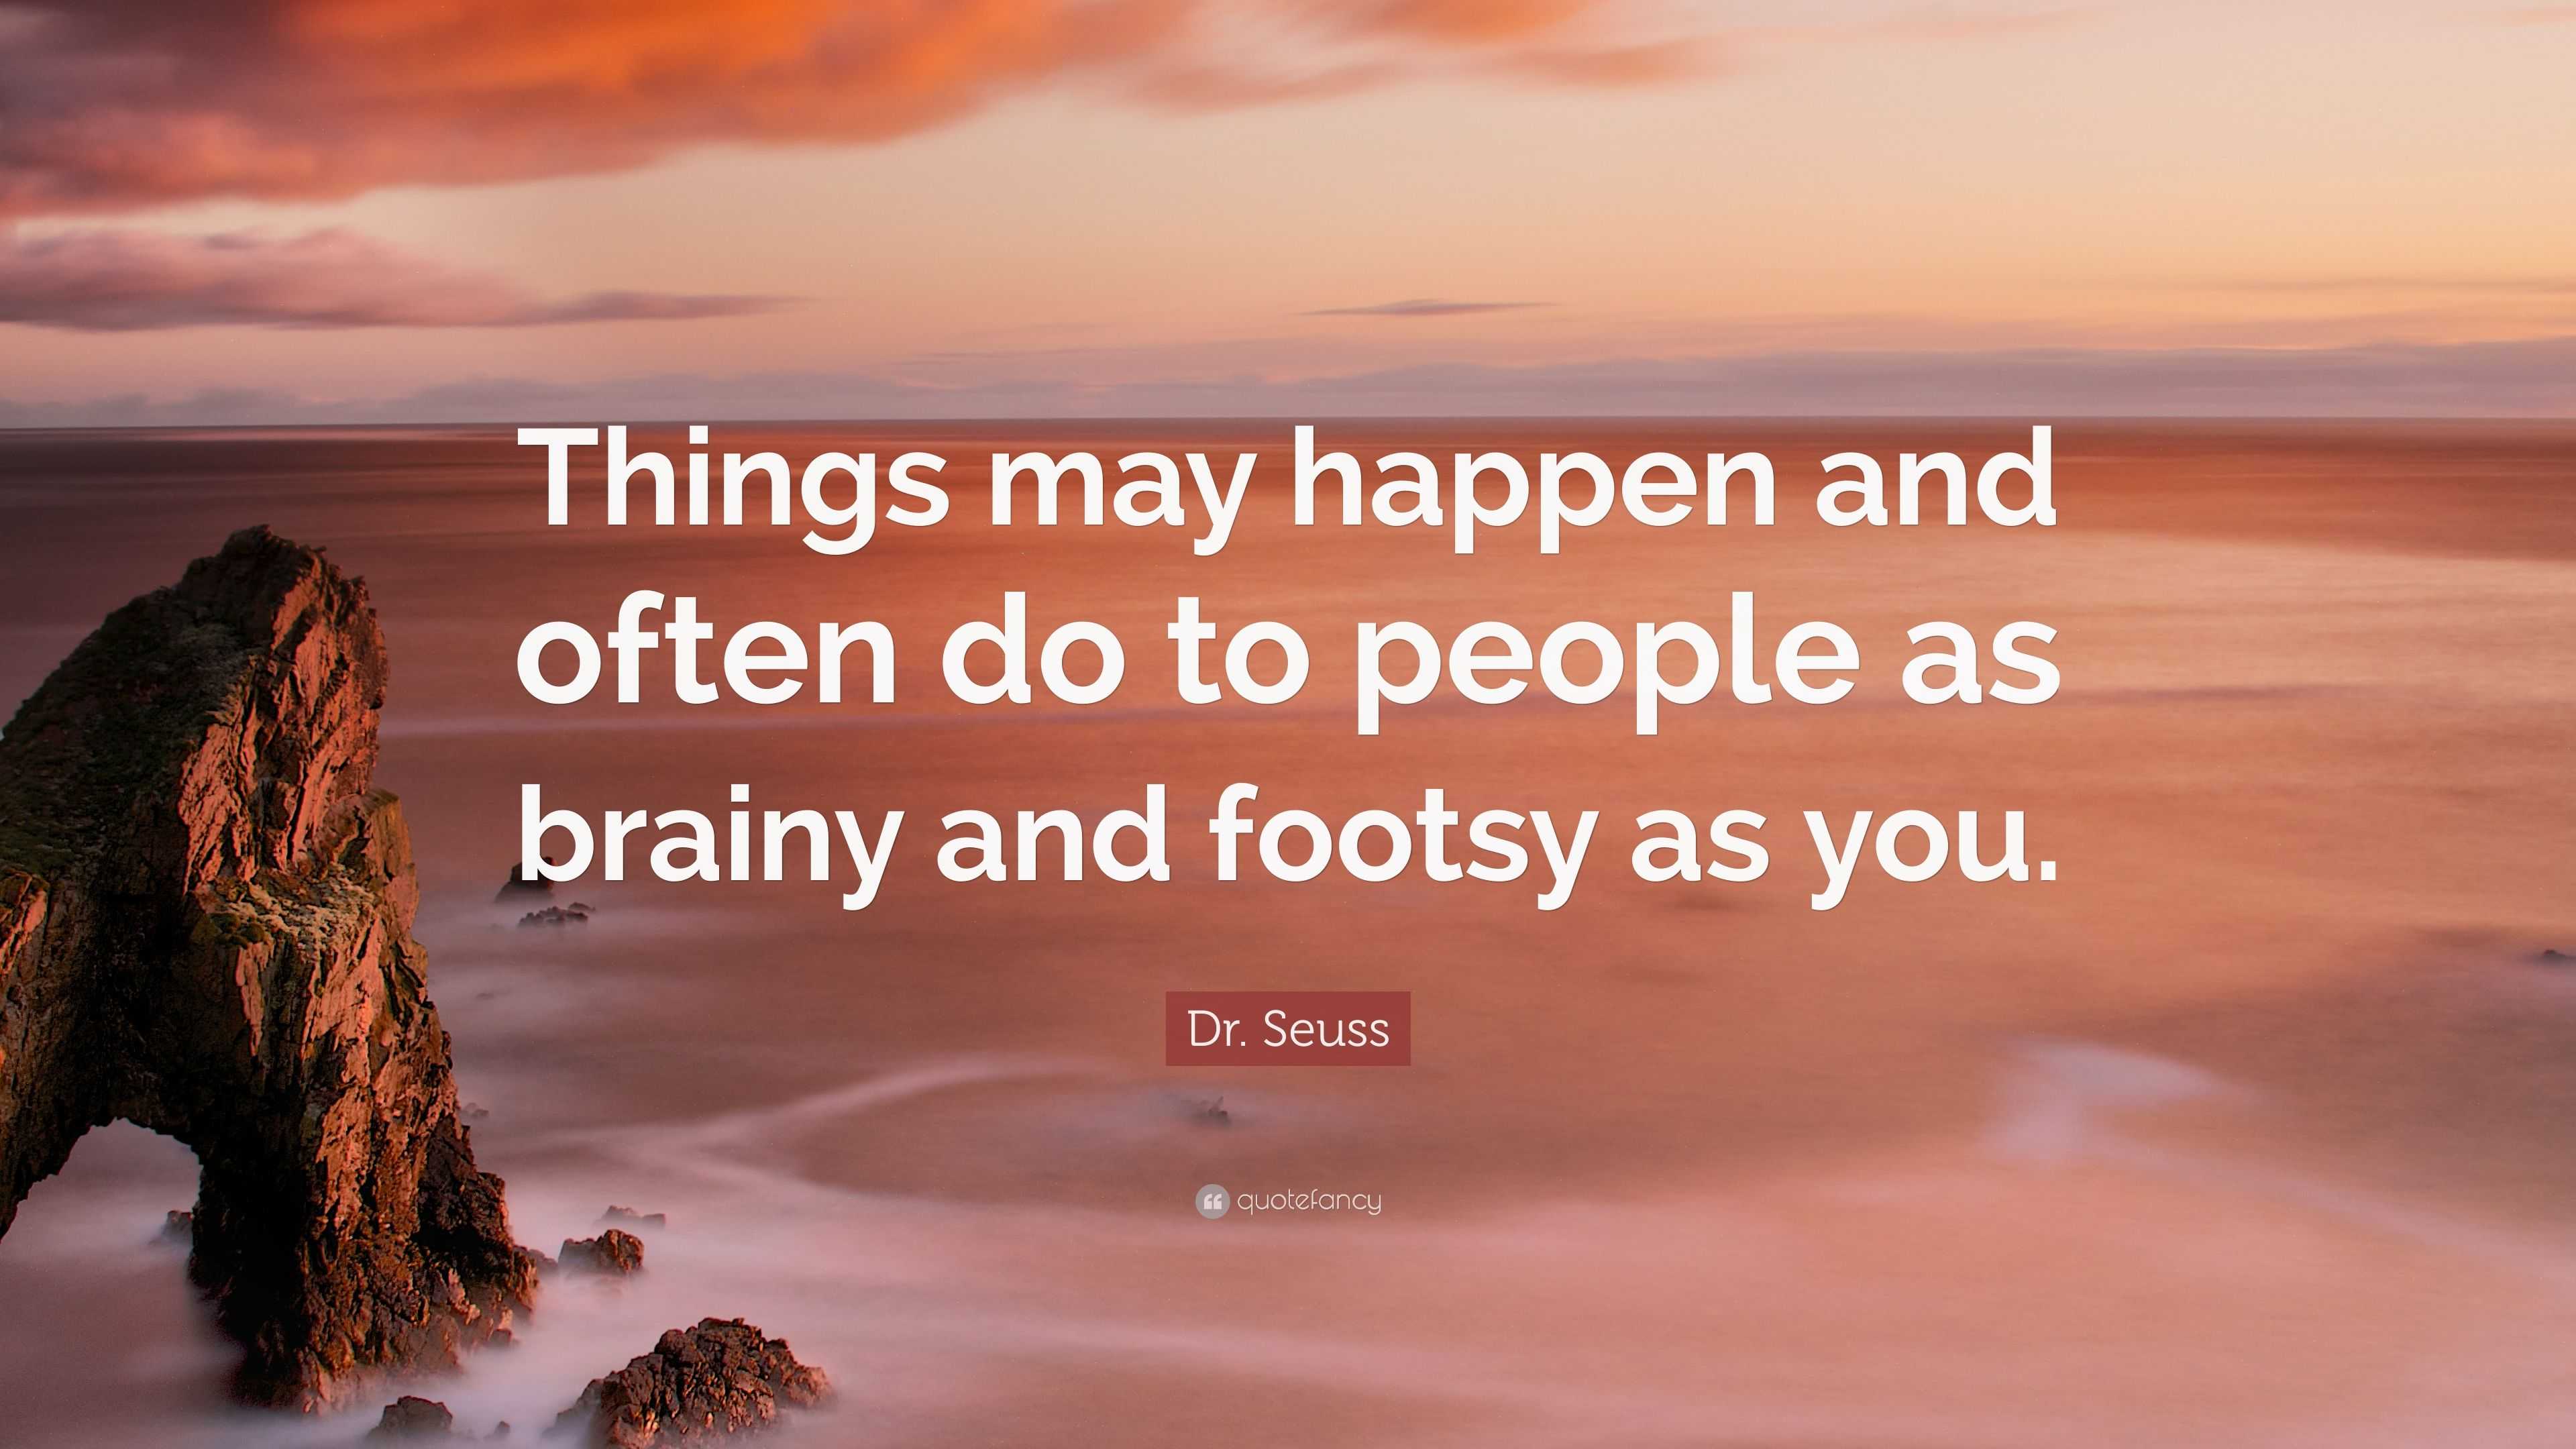 Dr. Seuss Quote “Things may happen and often do to people as brainy